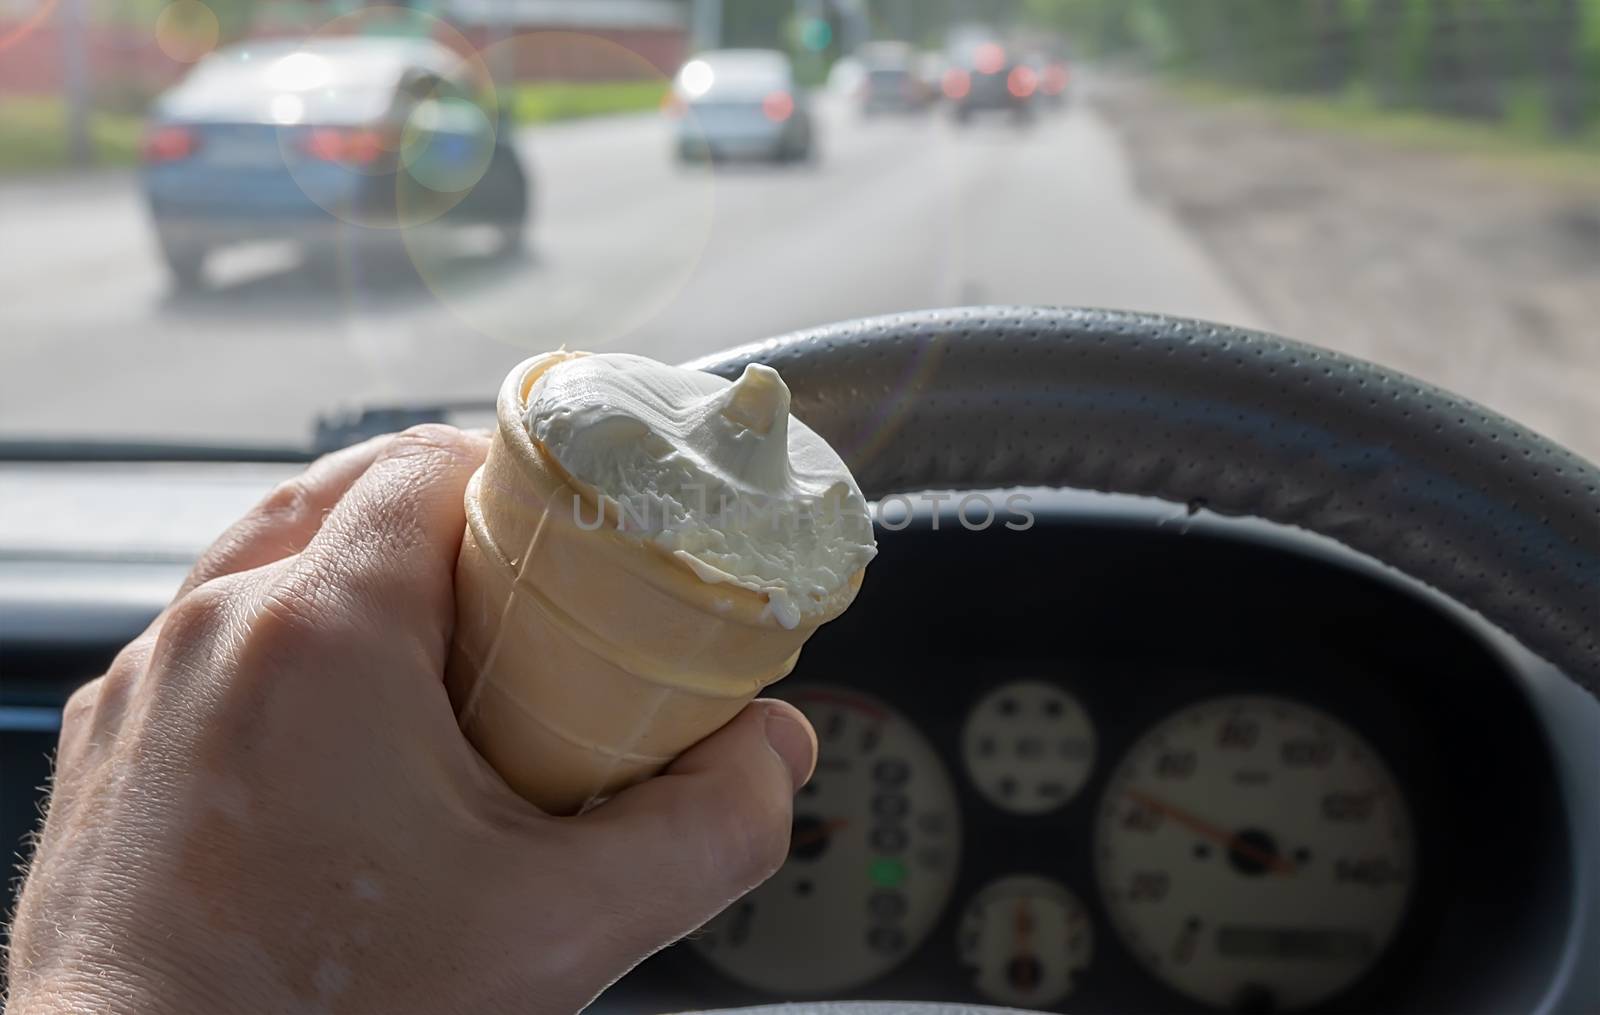 ice cream in the hand of the driver of the car against the background of the roadway with moving traffic